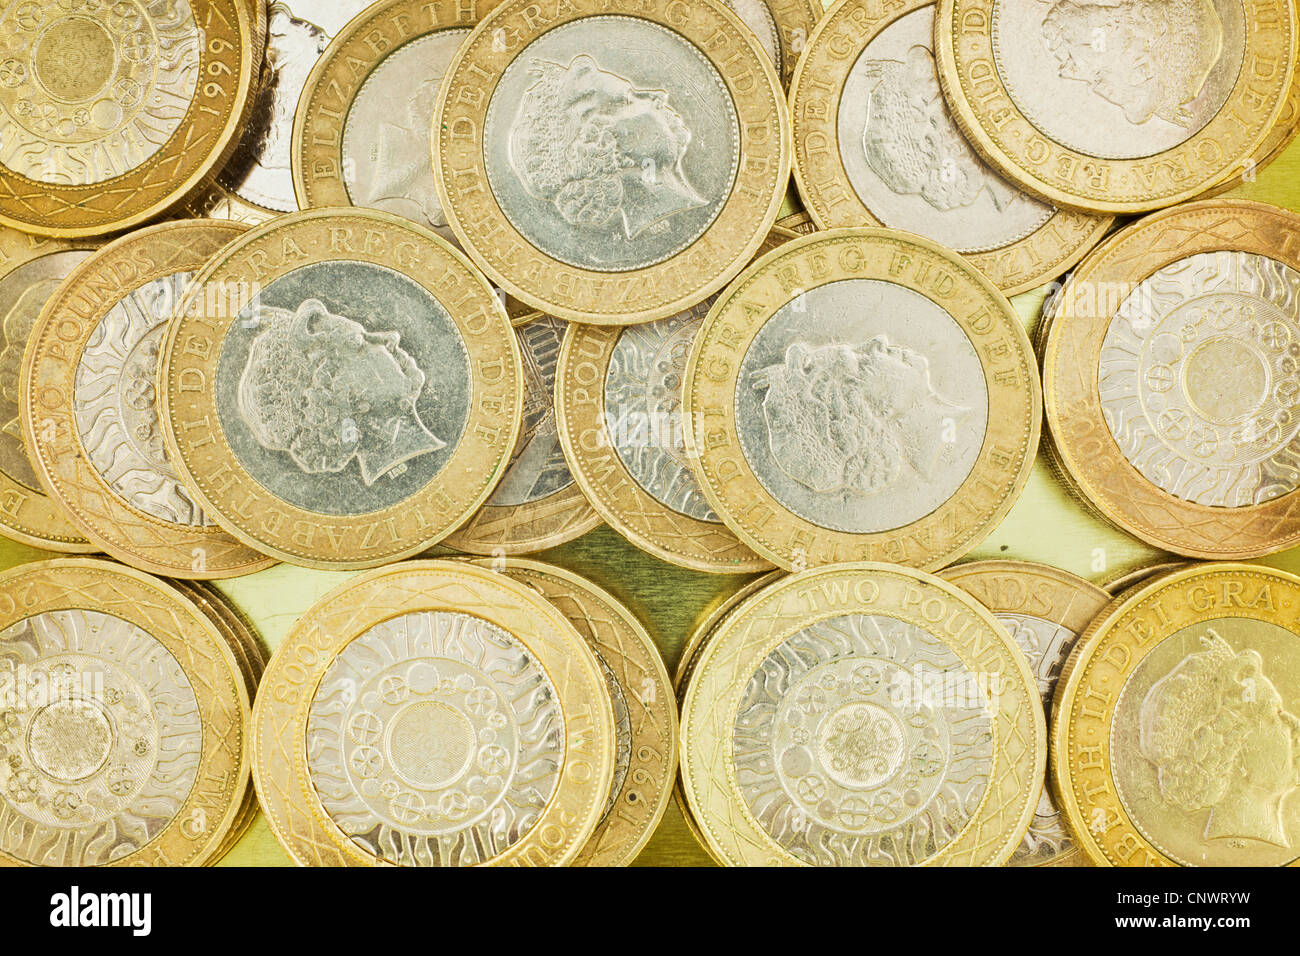 sterling currency coins £2 denomination [two pound] Stock Photo